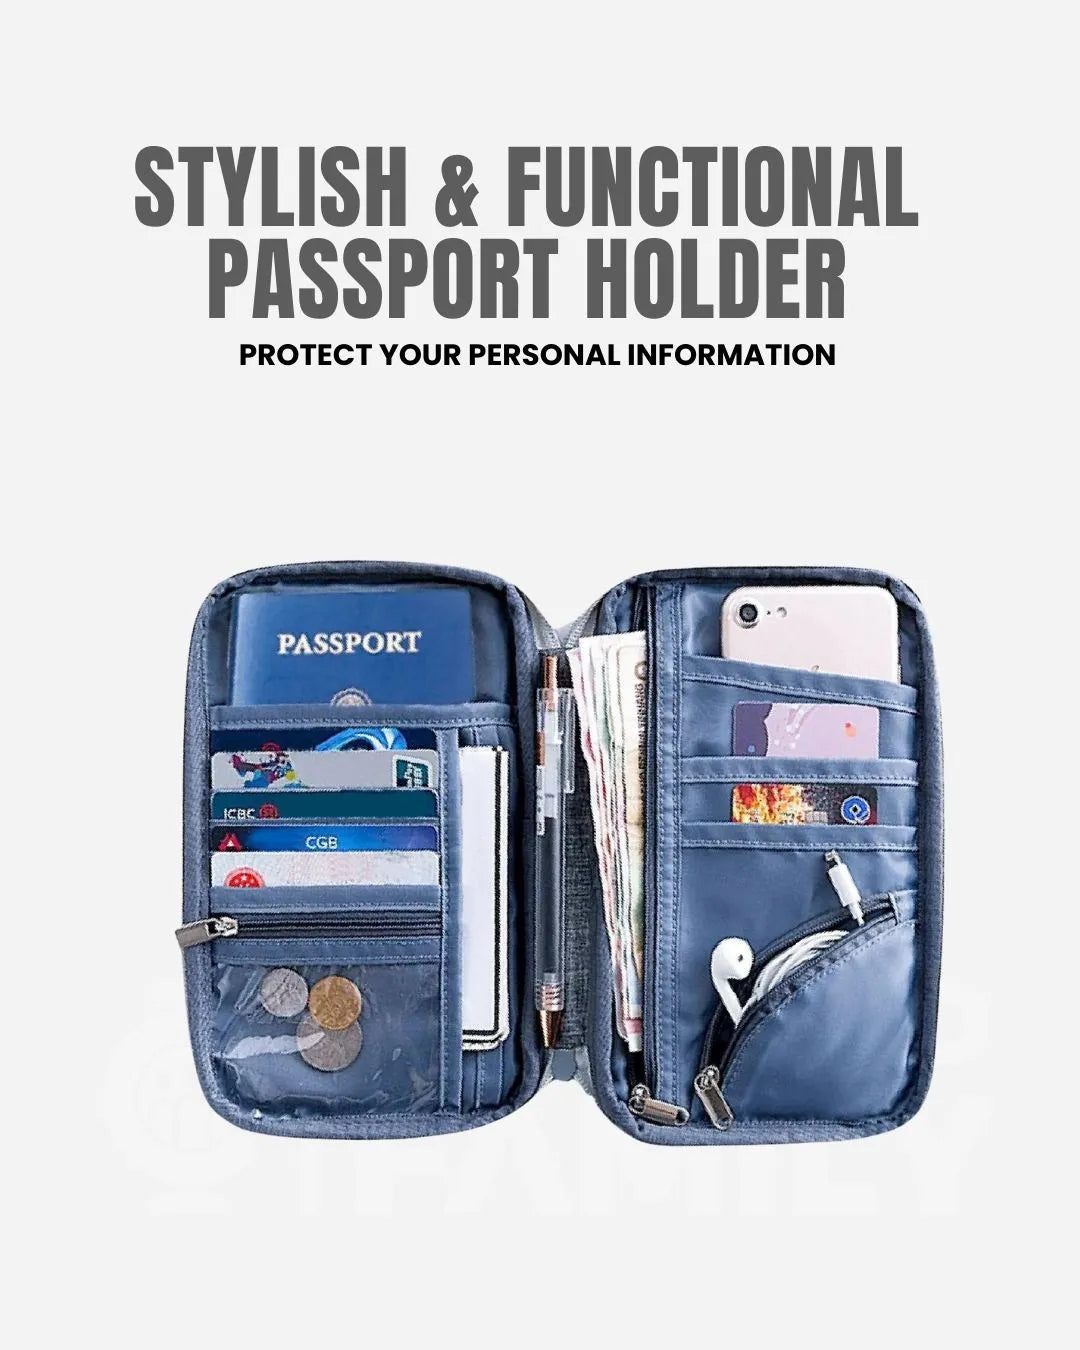 Travel with peace of mind with our Anti-Theft RFID Blocking Passport Holder, designed to keep your personal information and property safe from wireless identity theft risks.